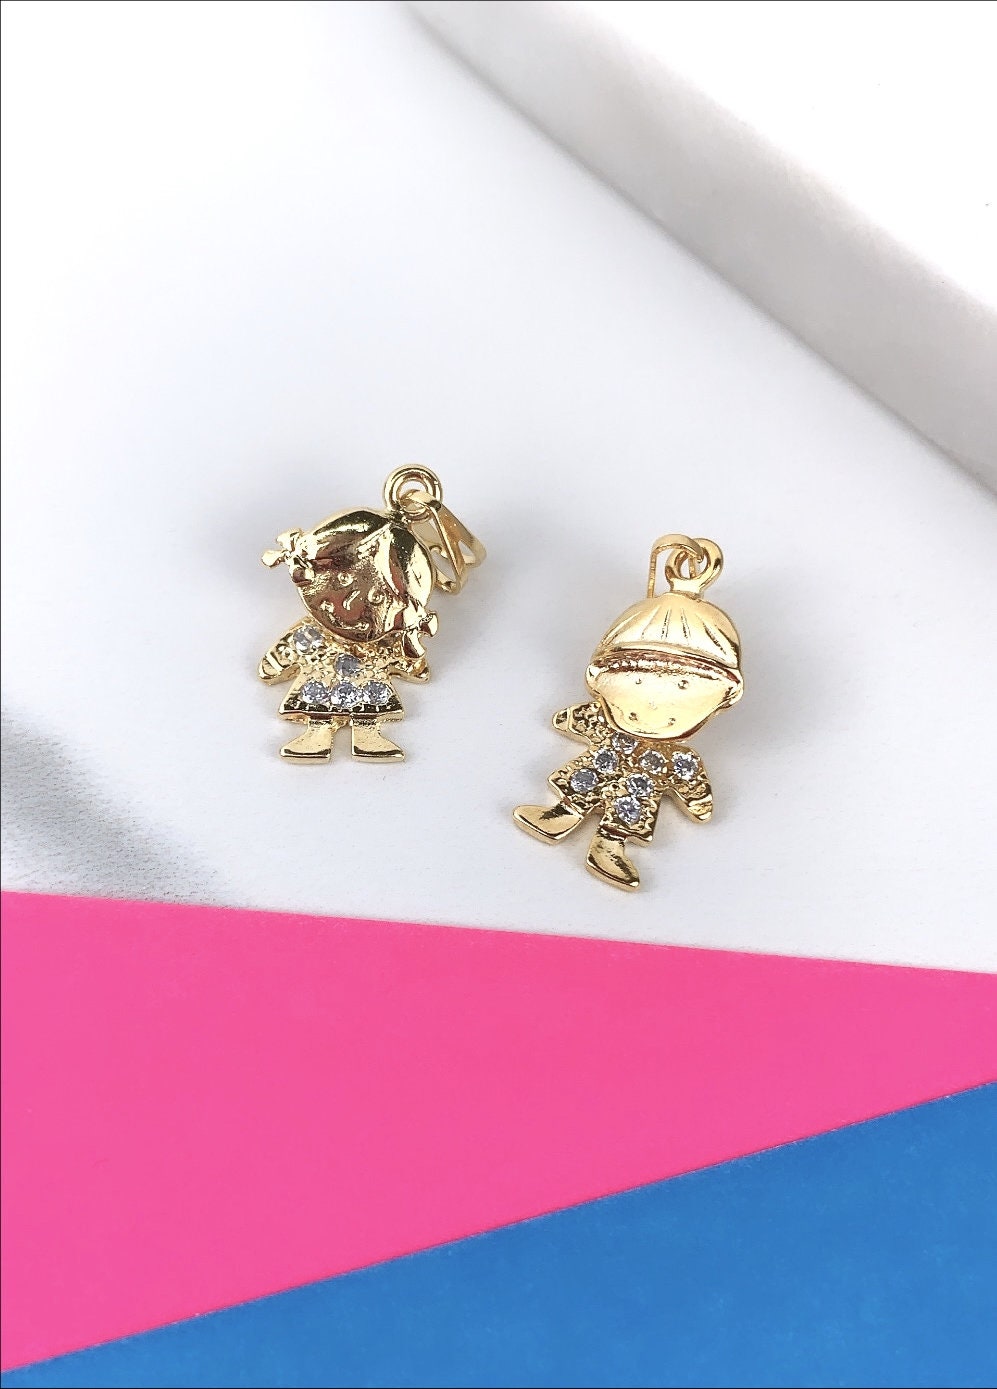 18K Gold Filled Boy or Girl Charms Pendant with Cubic Zirconia, Moving Head, for Wholesale and Jewelry Supplies, Family Jewelry for Mother Boy